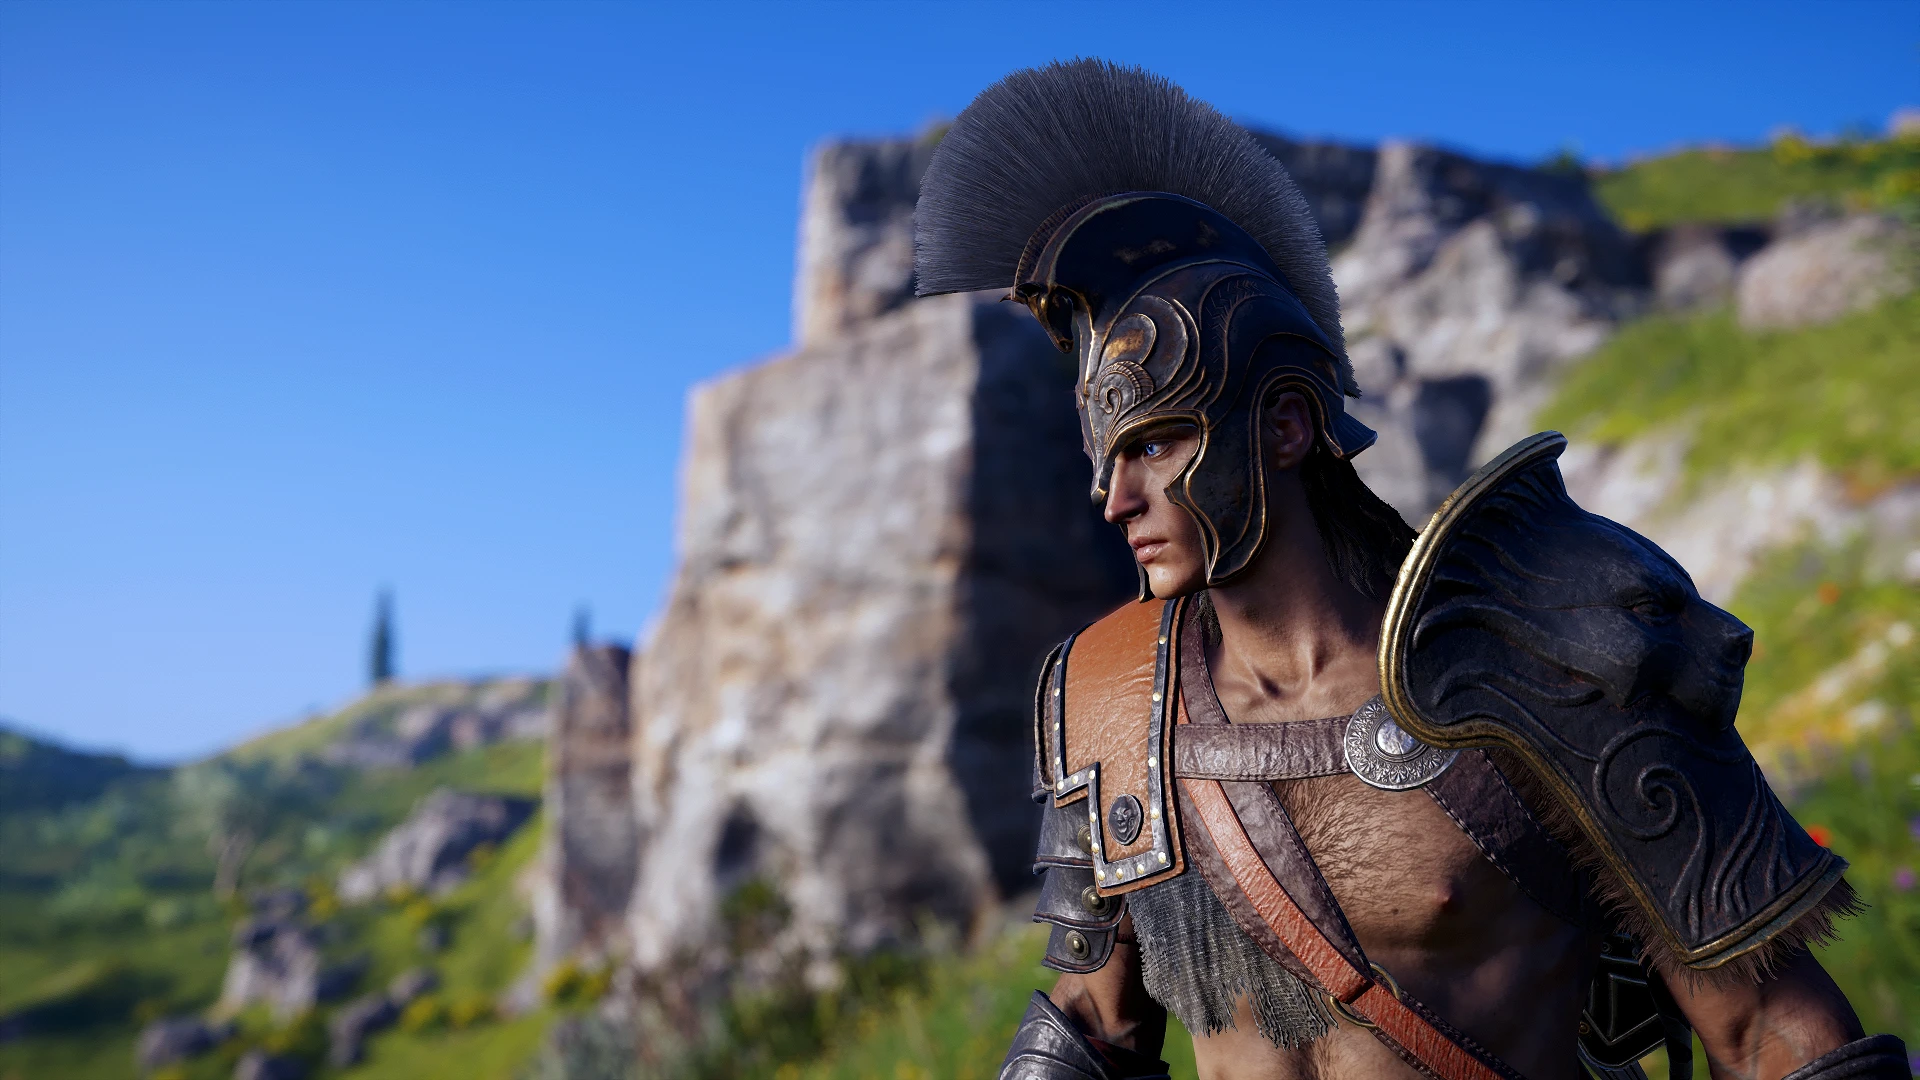 Download Alexios Assassins Creed Odyssey, Assassins, Creed, Odyssey, Alexios  Wallpaper in 2800x2100 Resolution